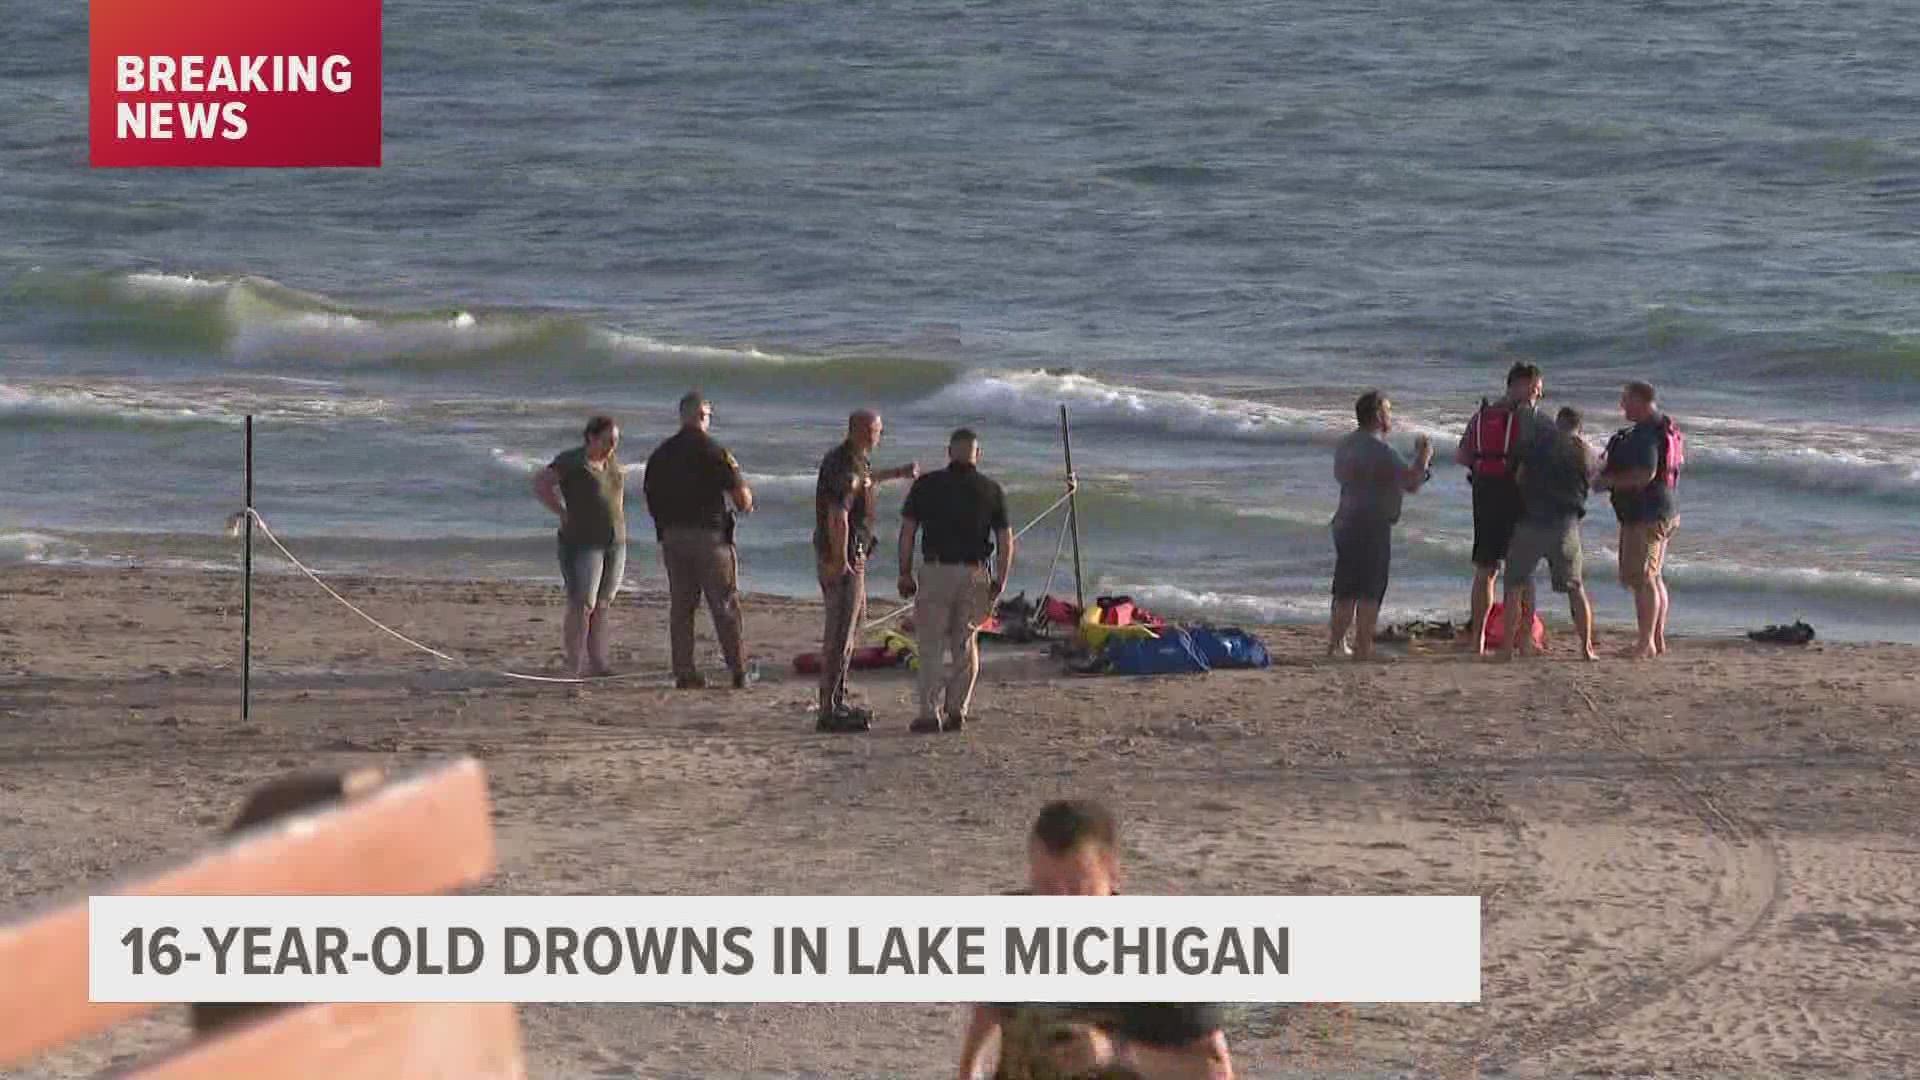 Authorities say the teen was from Norton Shores and was at the beach with a church group when he got swept away by the waves.